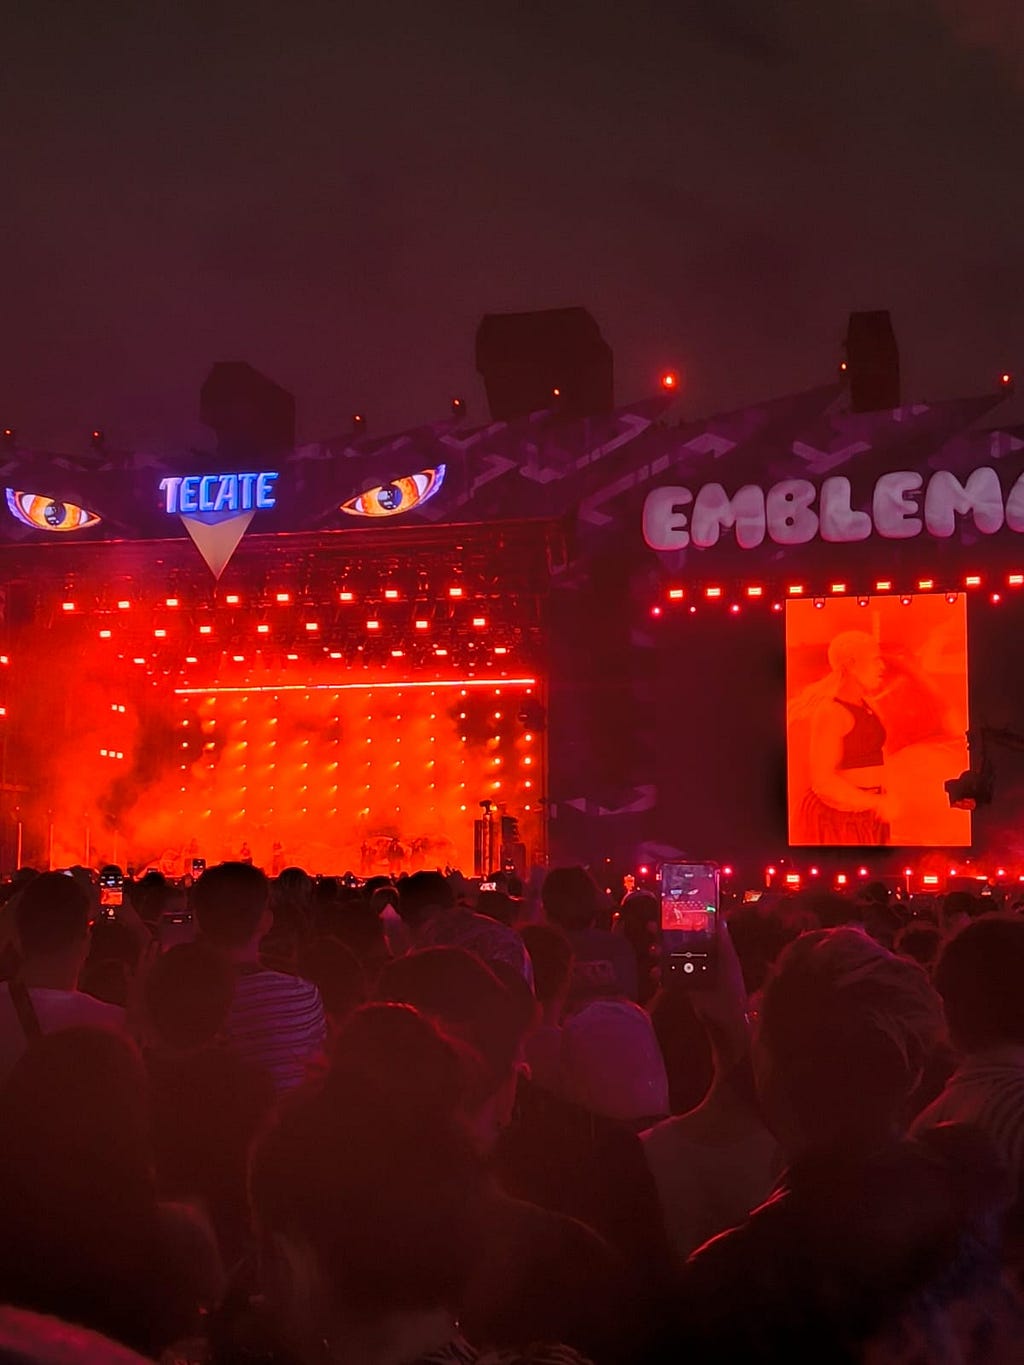 Photo taken during a performance at Tecate Emblema festival